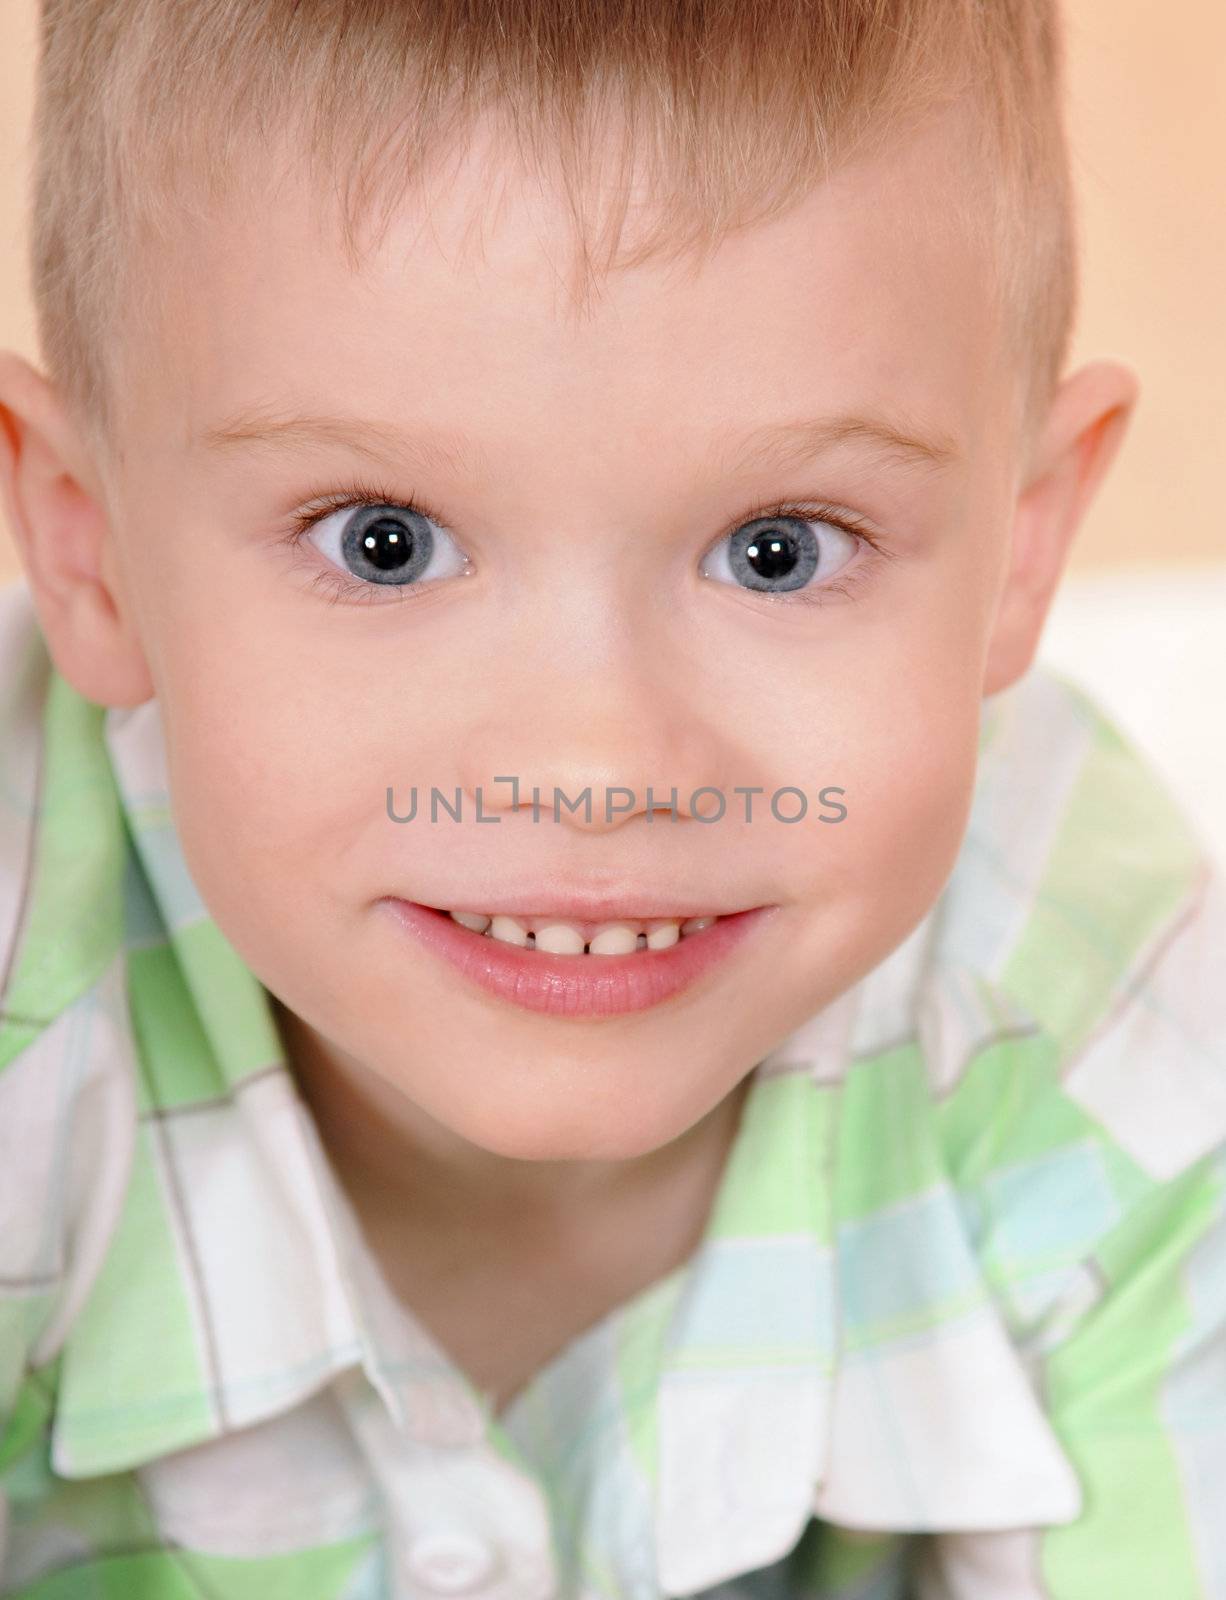 portrait of a smiling child shootin close-up